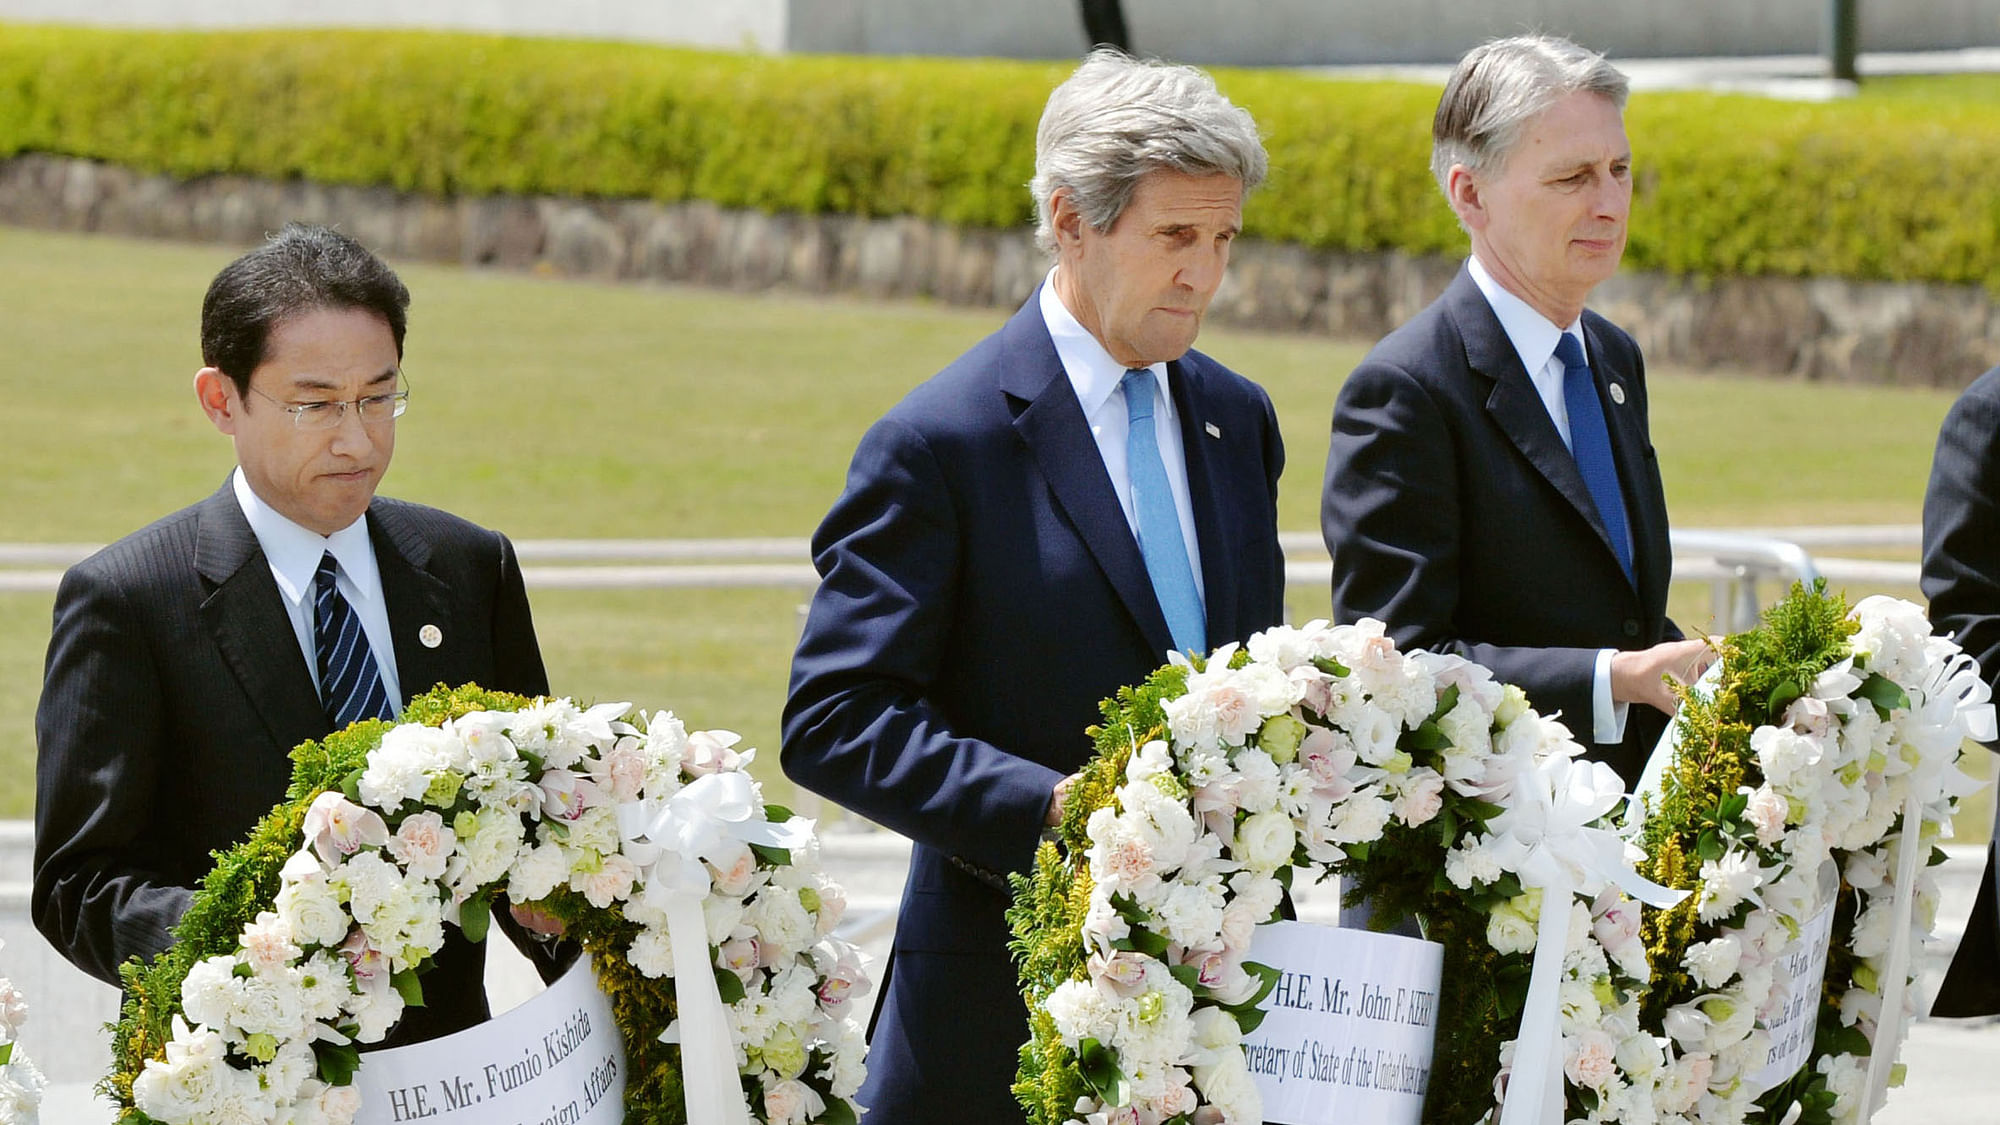 (L-R), Japan’s Foreign Minister Fumio Kishida, US Secretary of State John Kerry and Britain’s Foreign Minister Philip Hammond carry wreaths to offer at the cenotaph at Hiroshima Peace Memorial Park, Japan on Monday, April 11, 2016. (Photo: AP)